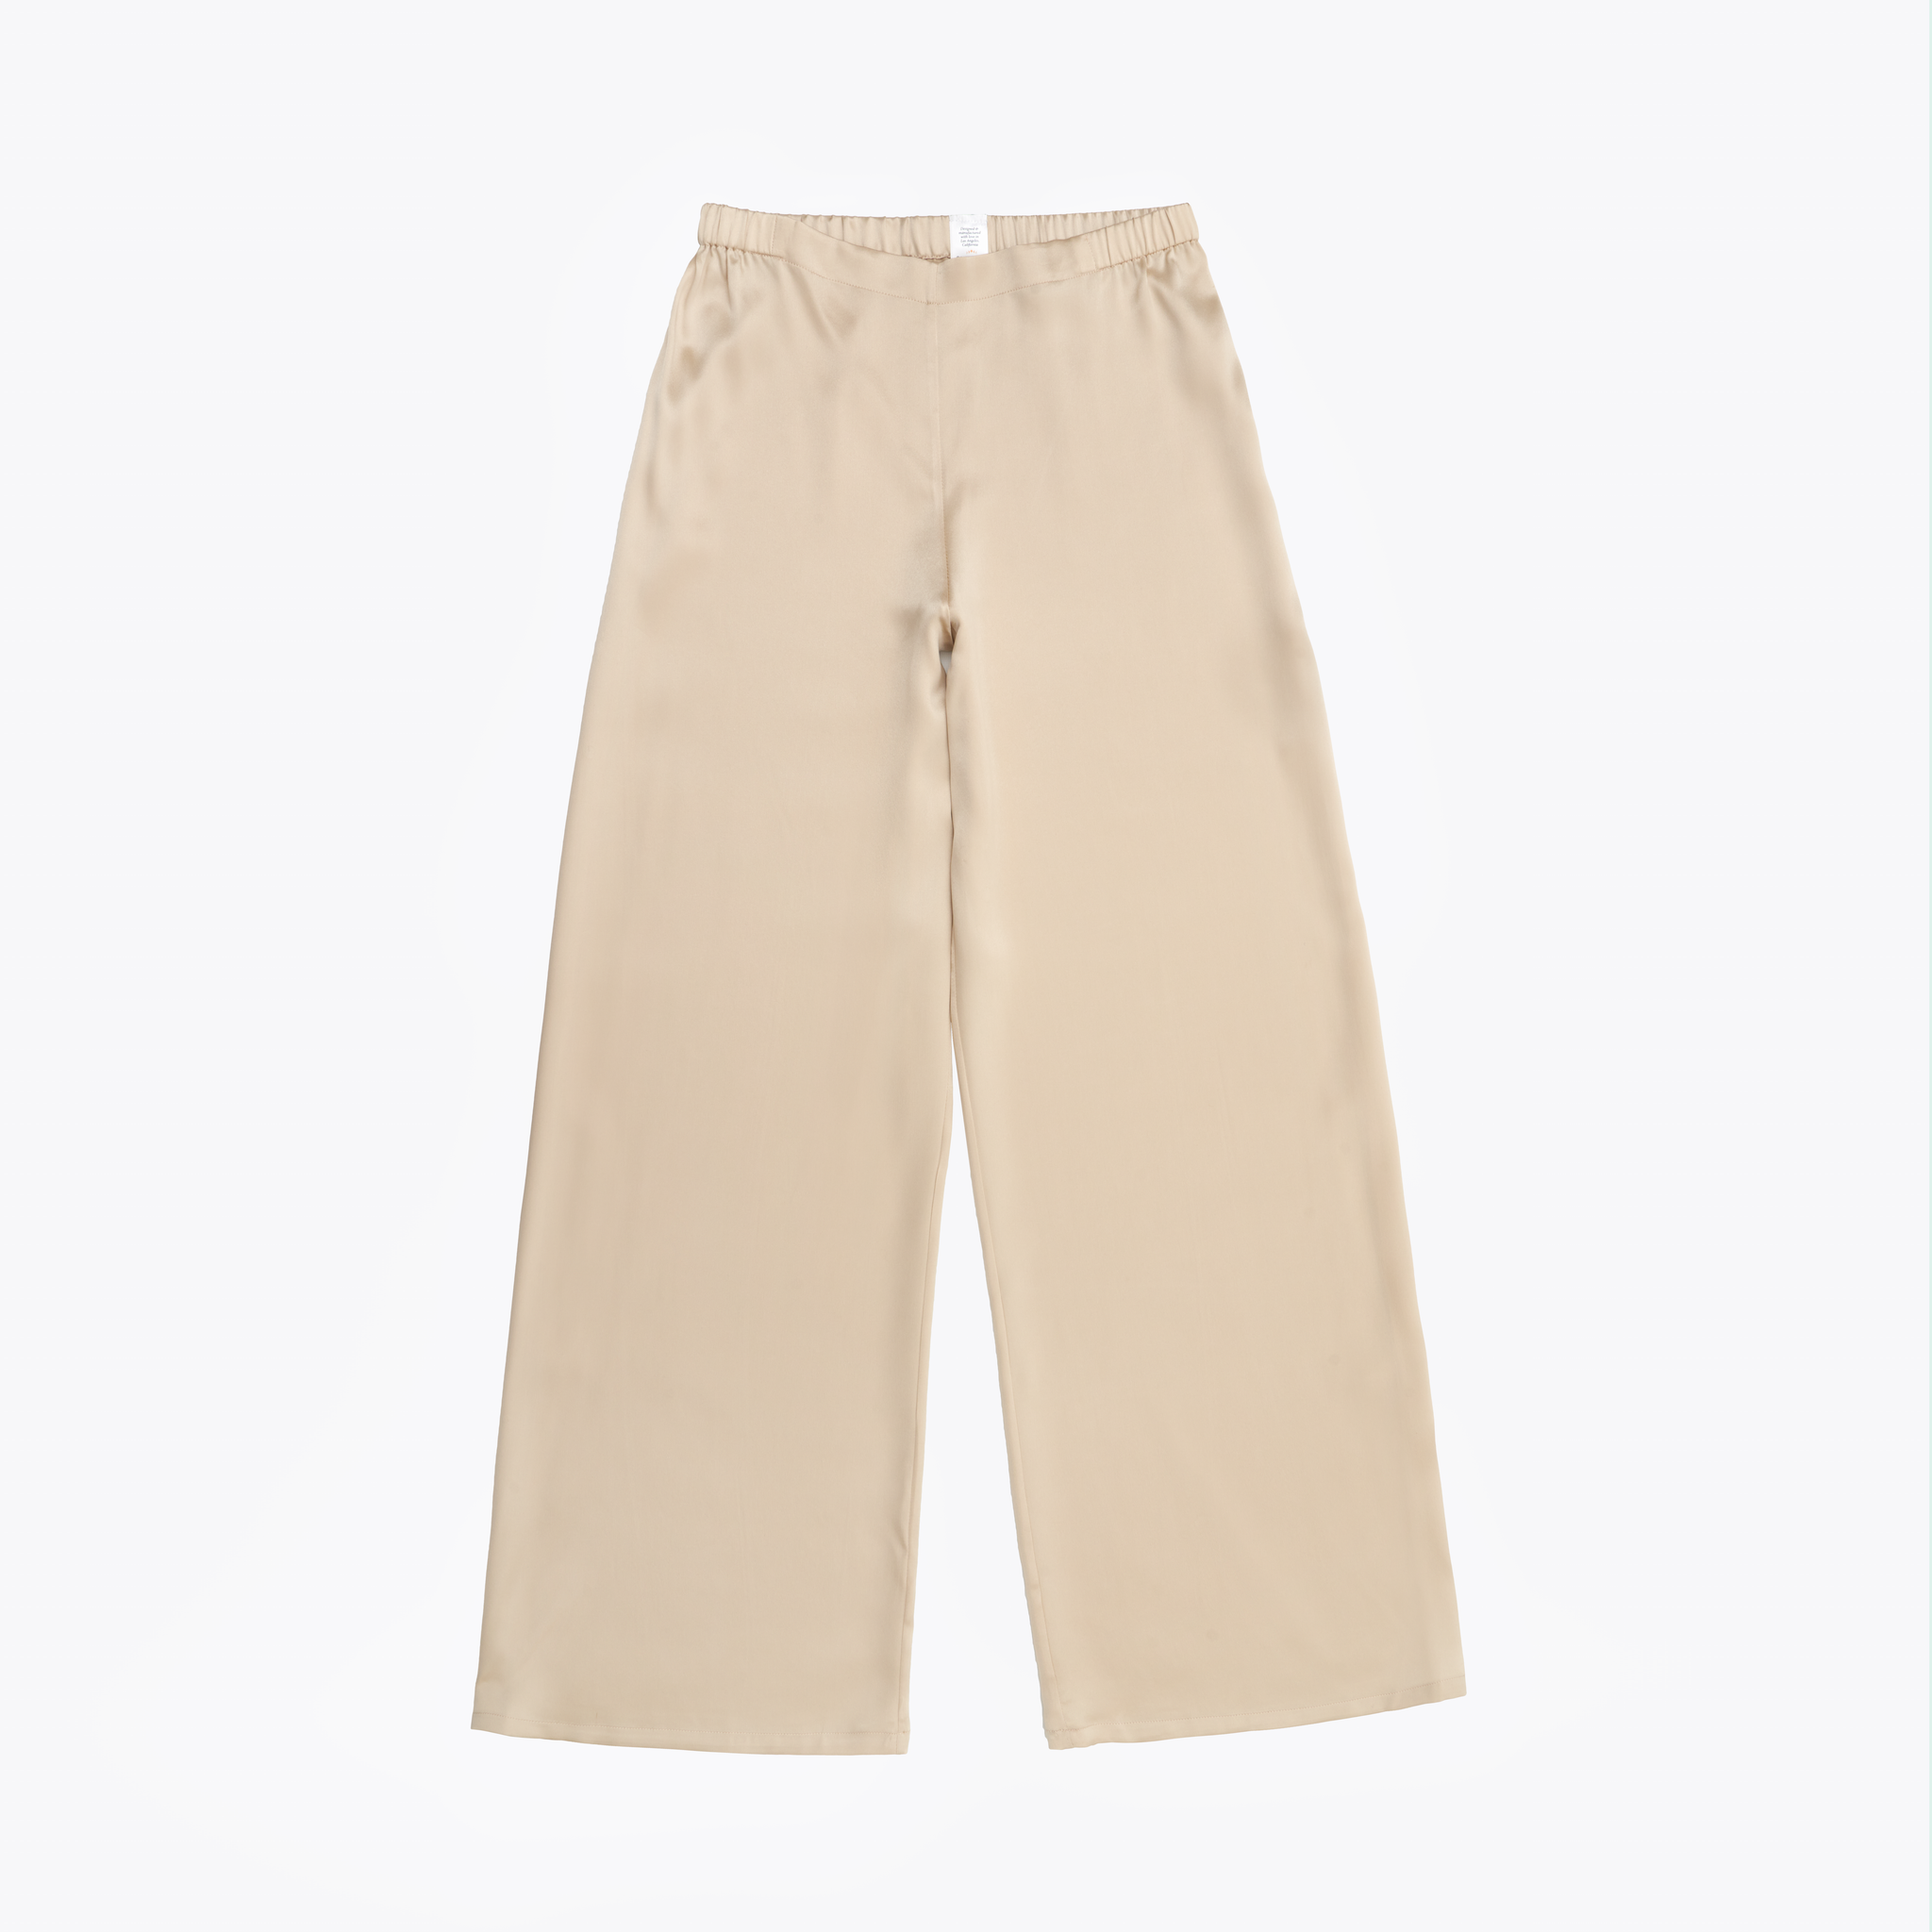 Pants Perseo ☾ Sand